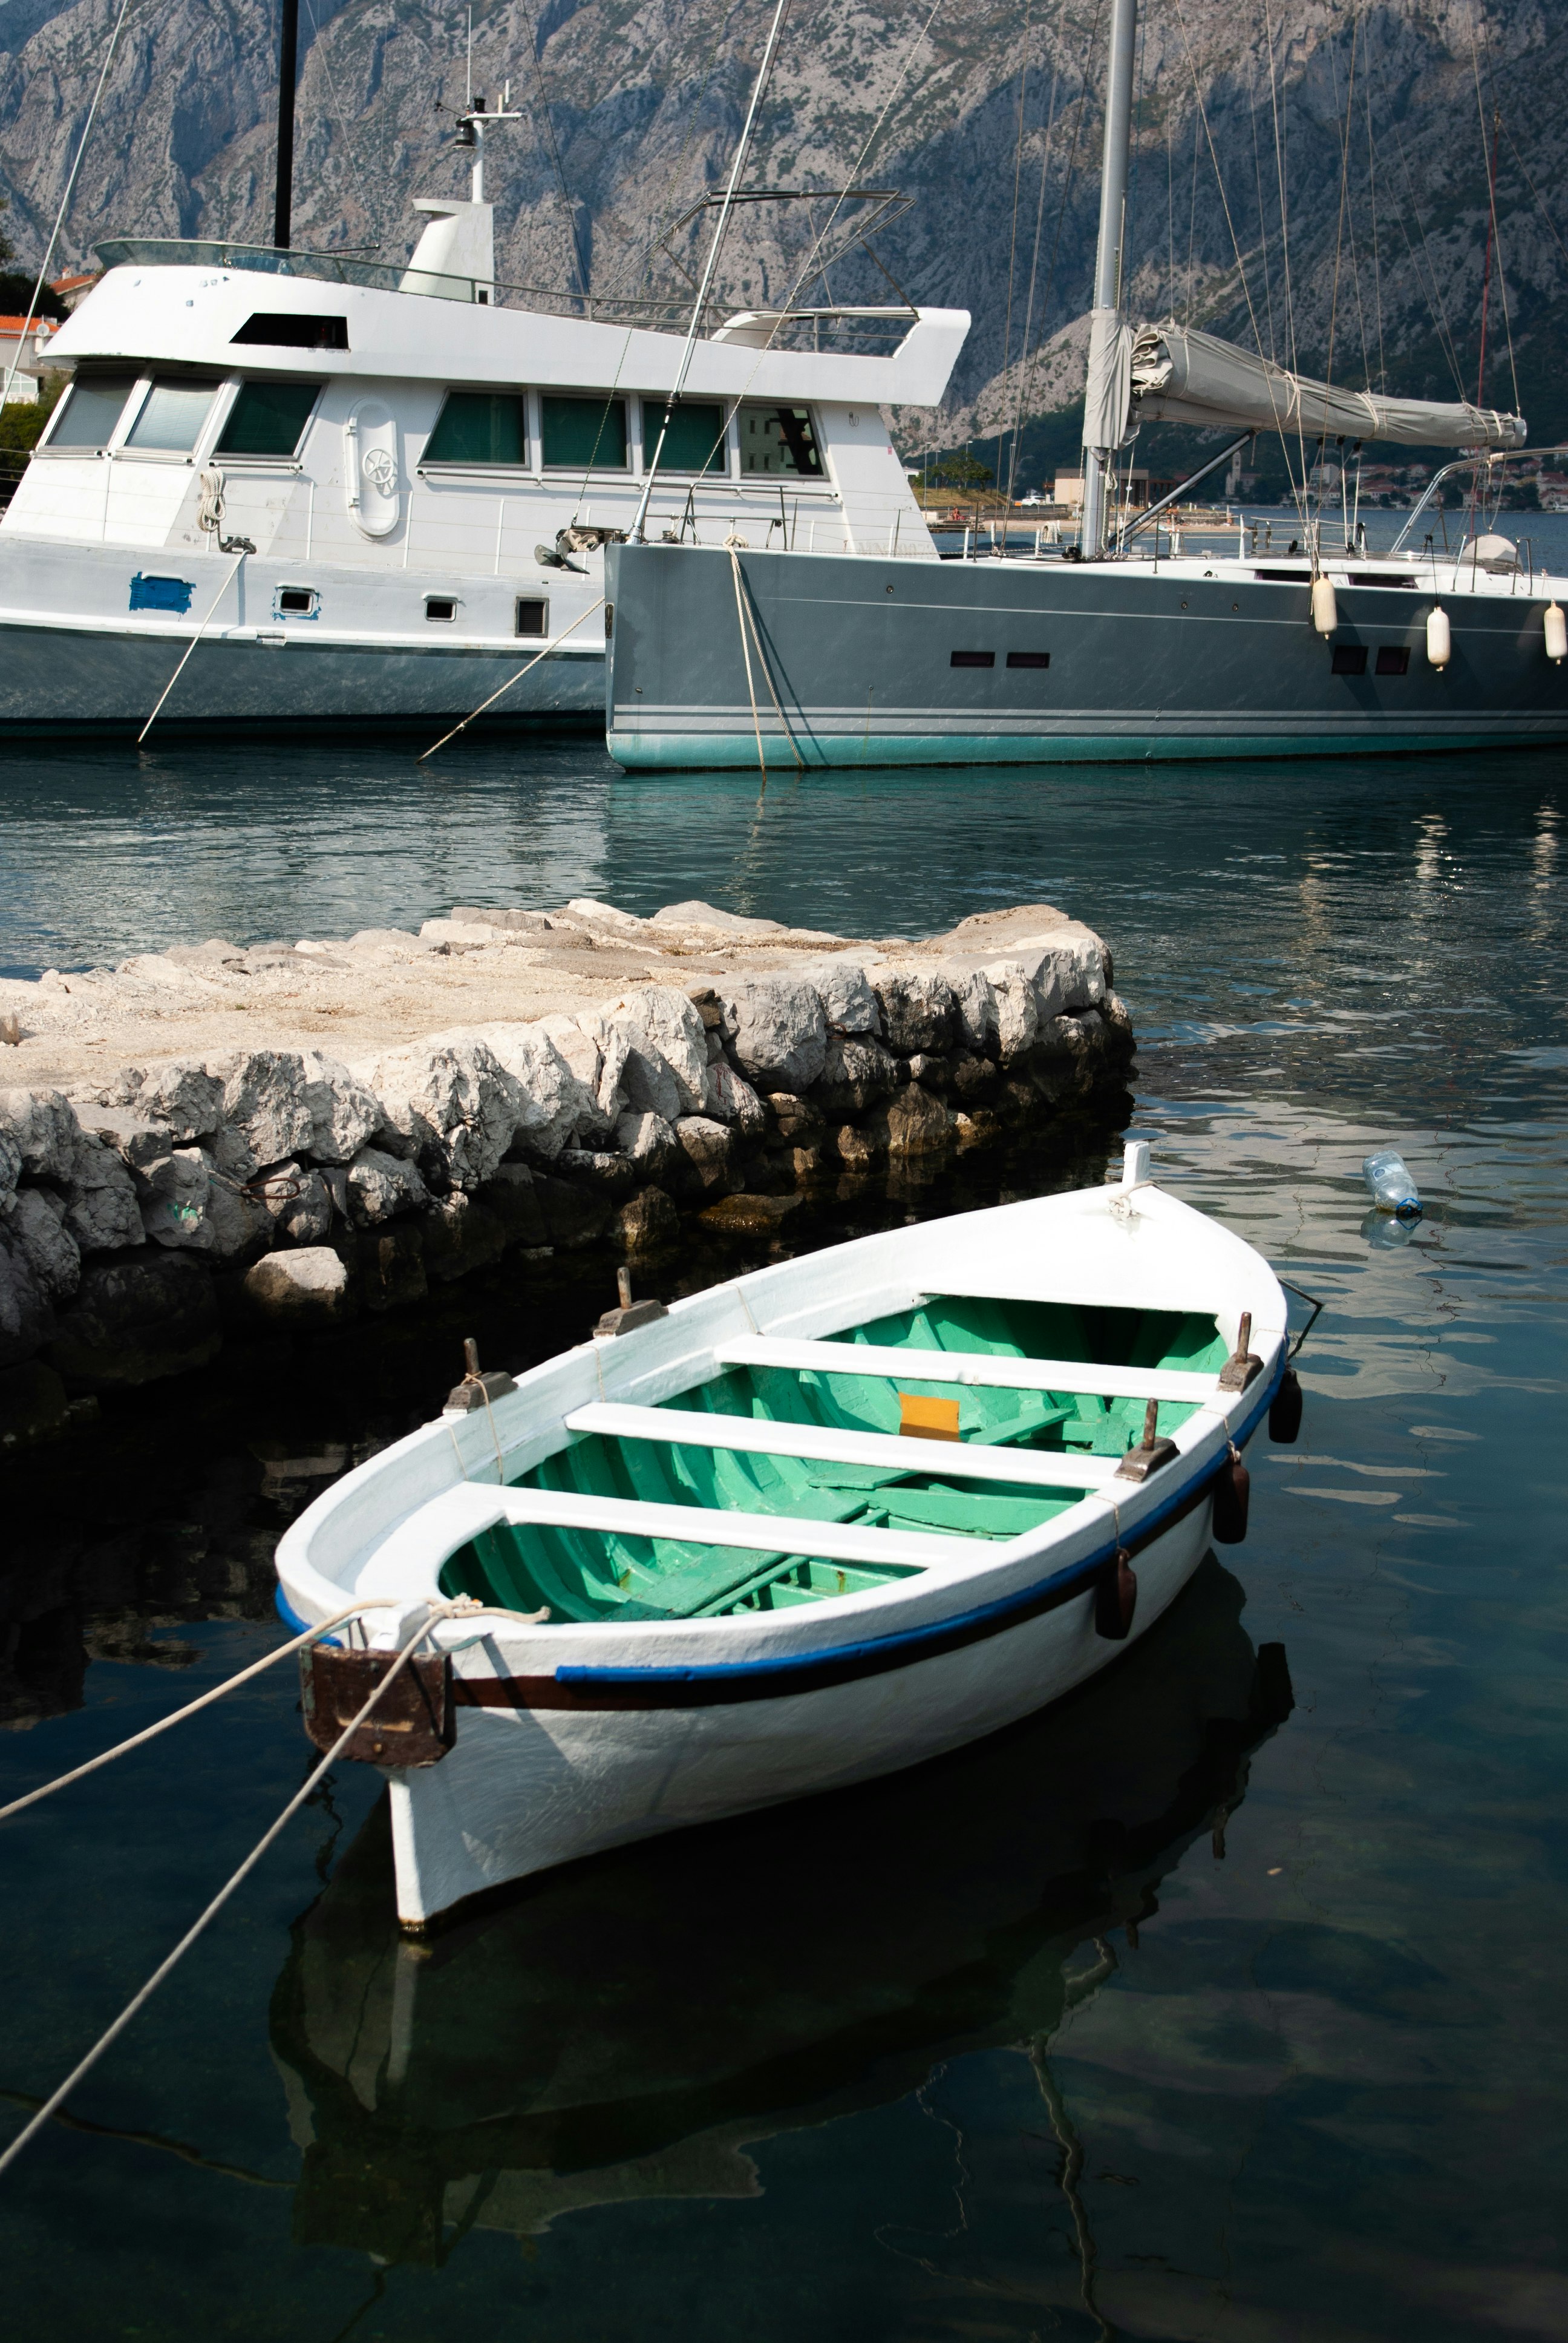 white and green boat on body of water during daytime